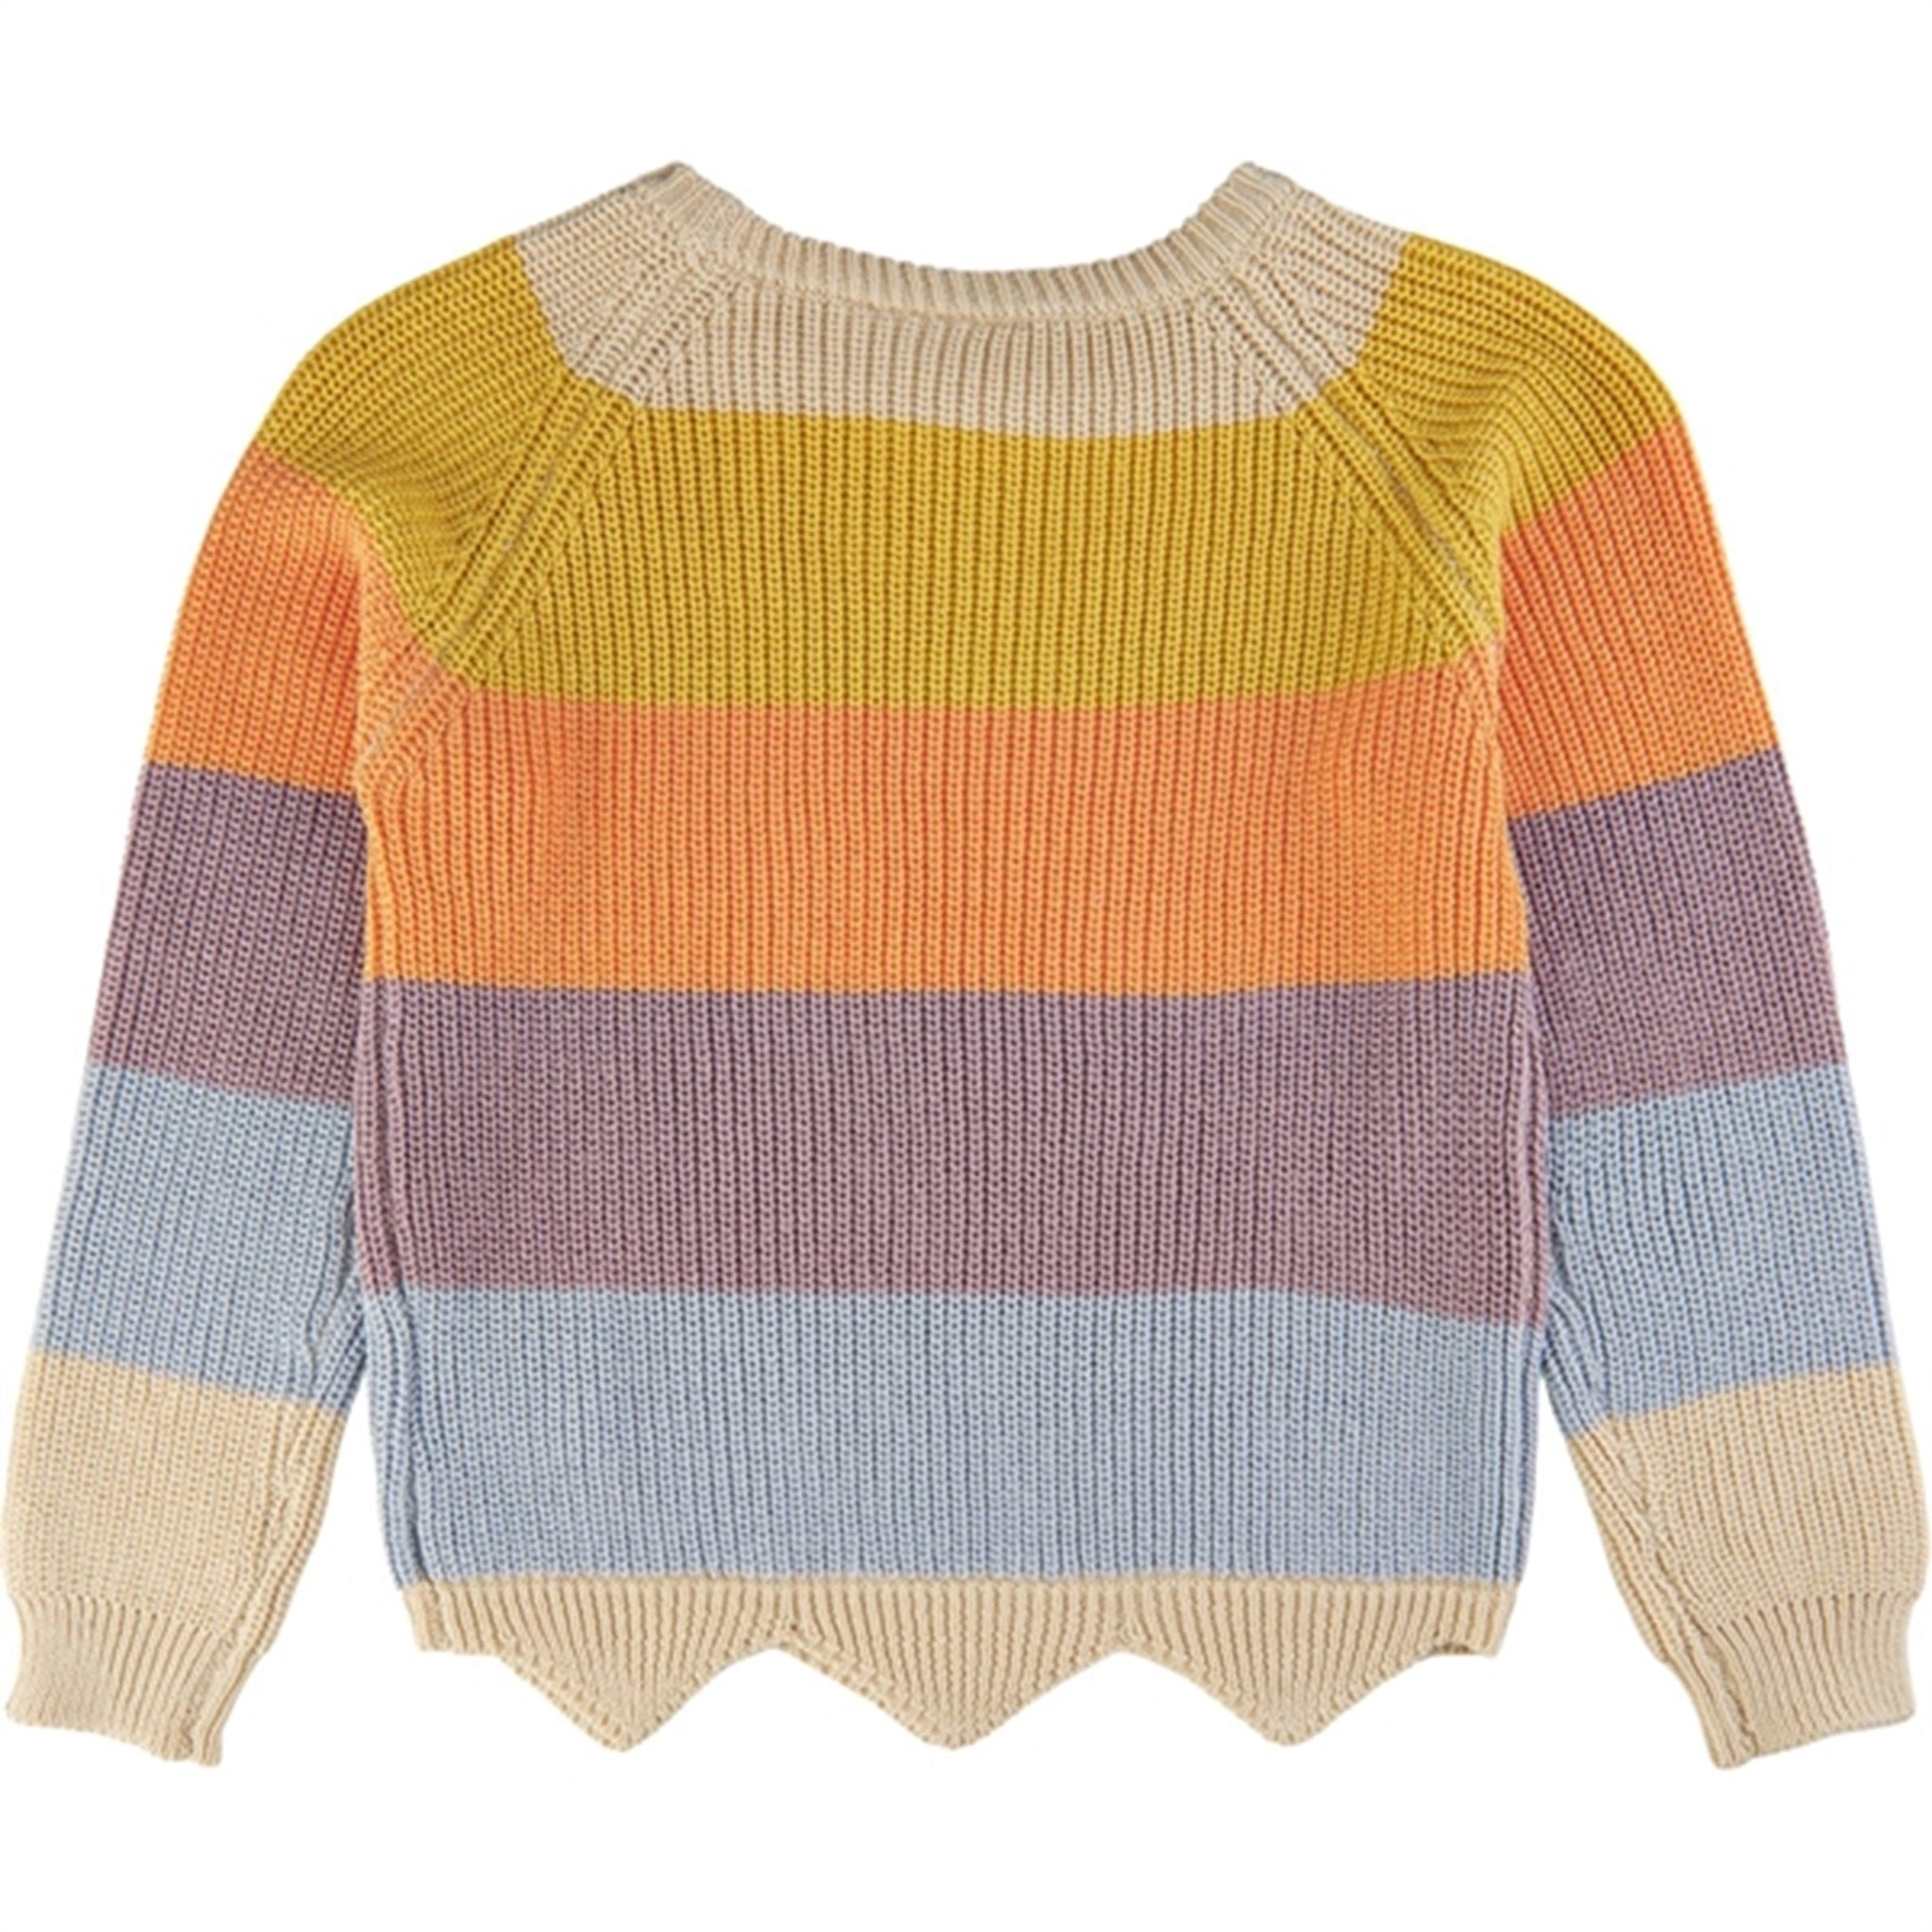 THE NEW Multi Olly Knit 3